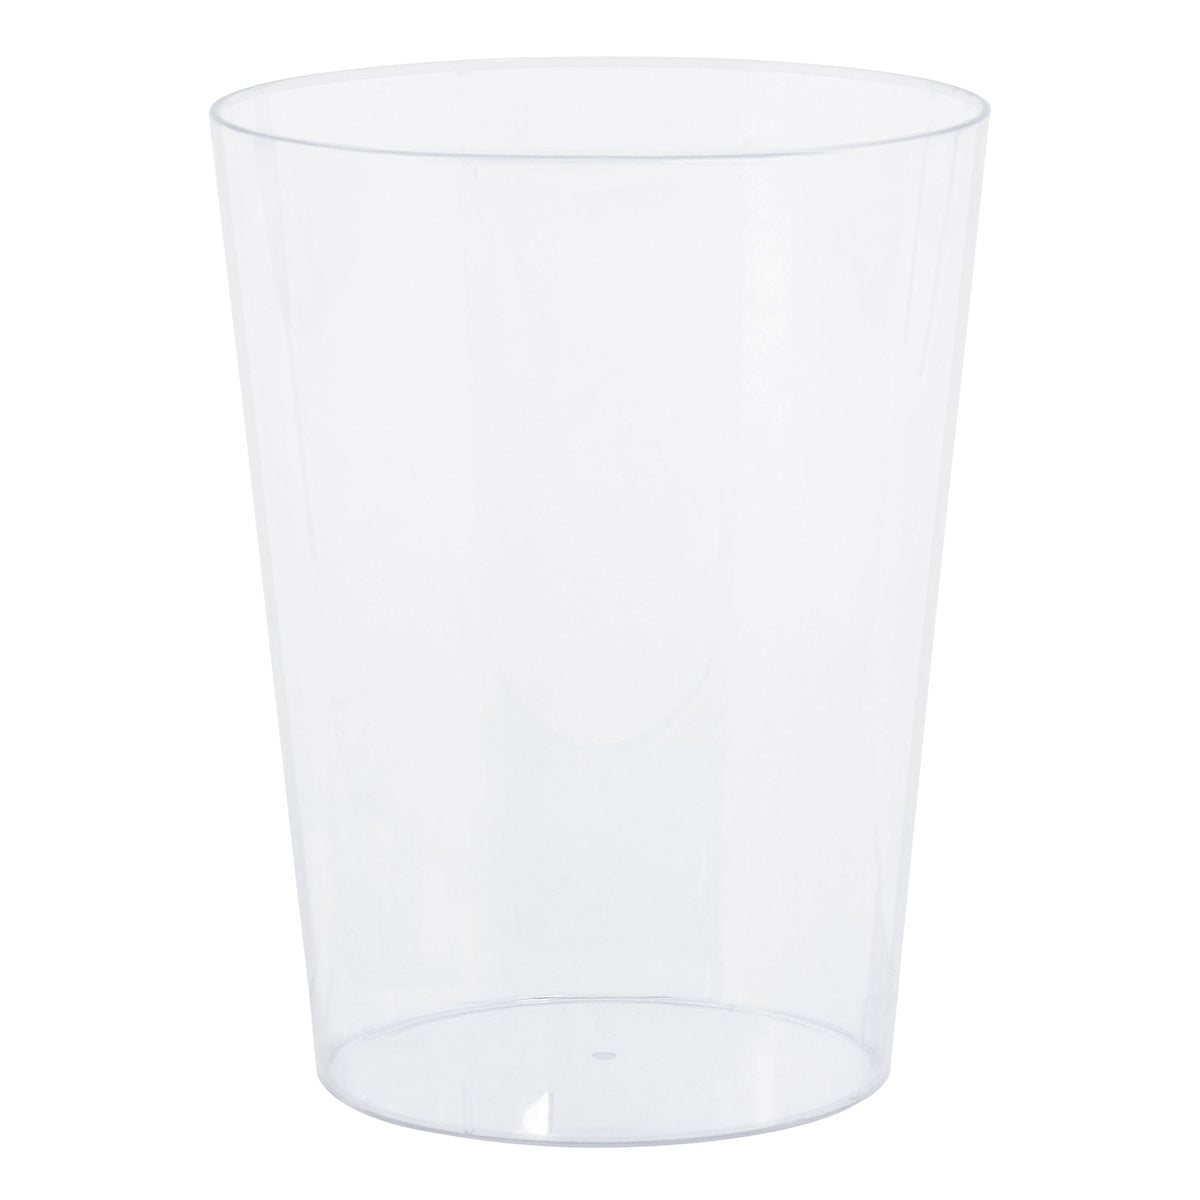 Round 7 1/2" Clear Plastic Cylinder Container